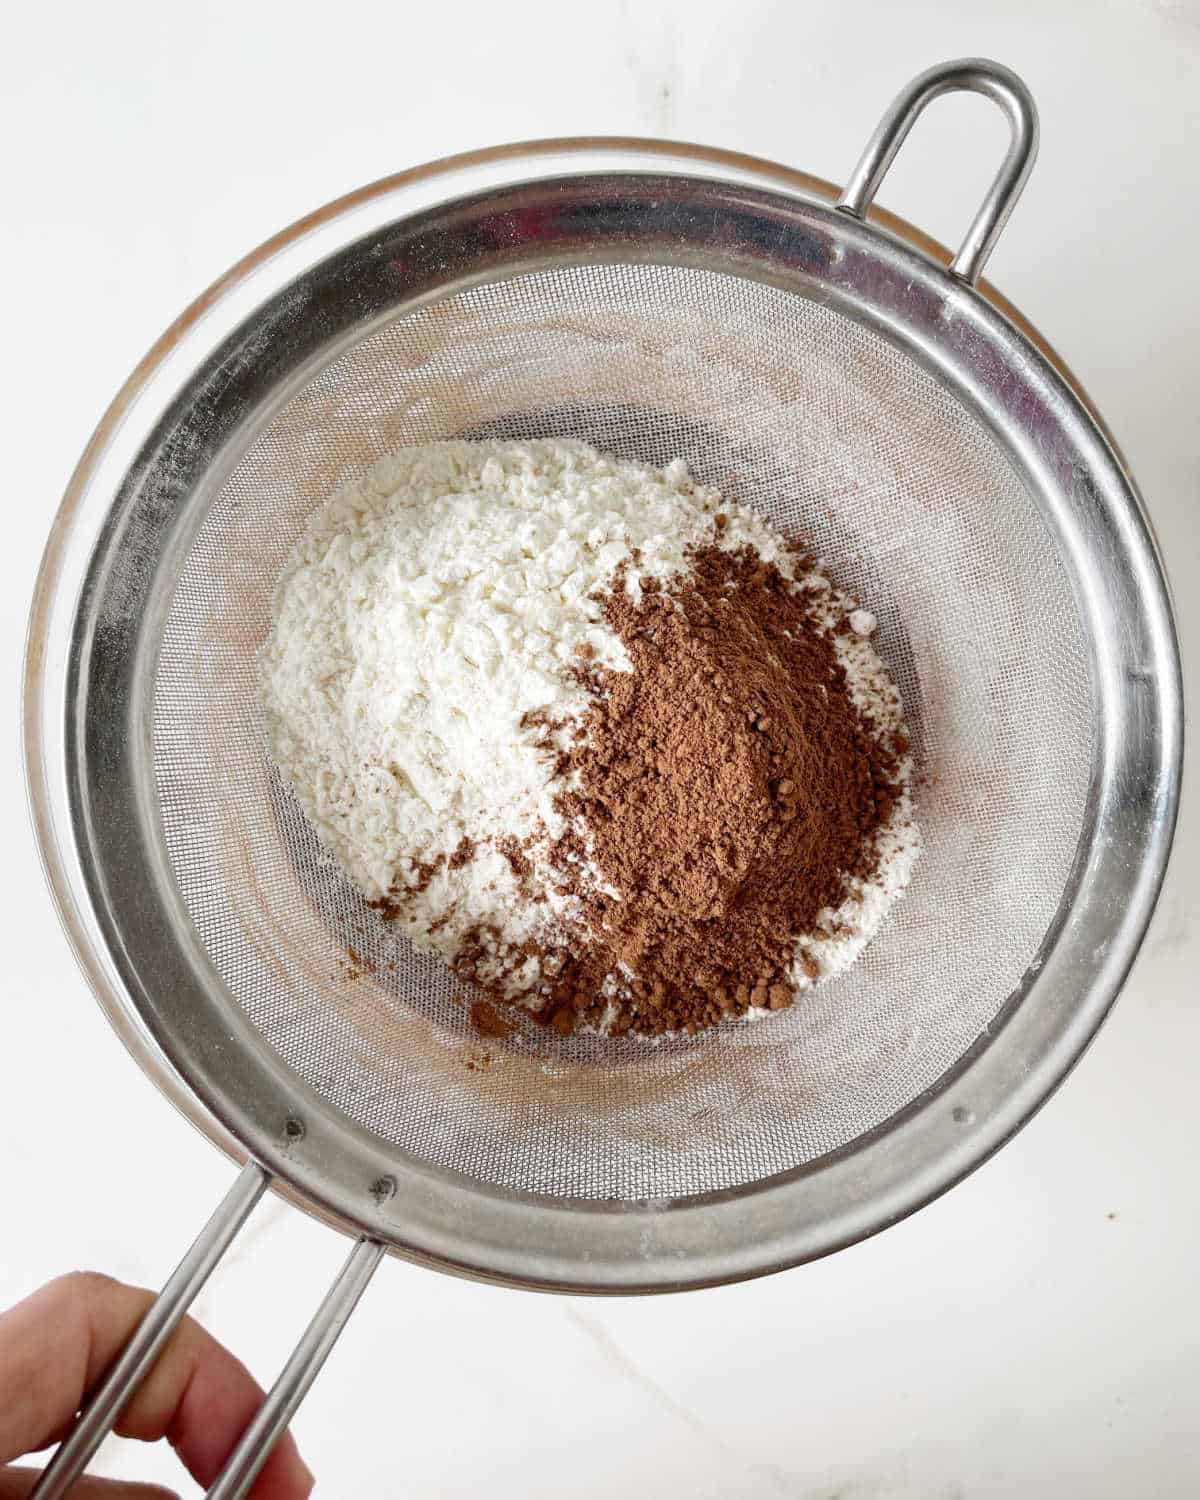 Sifting flour and cocoa powder over a glass bowl on a white surface. 